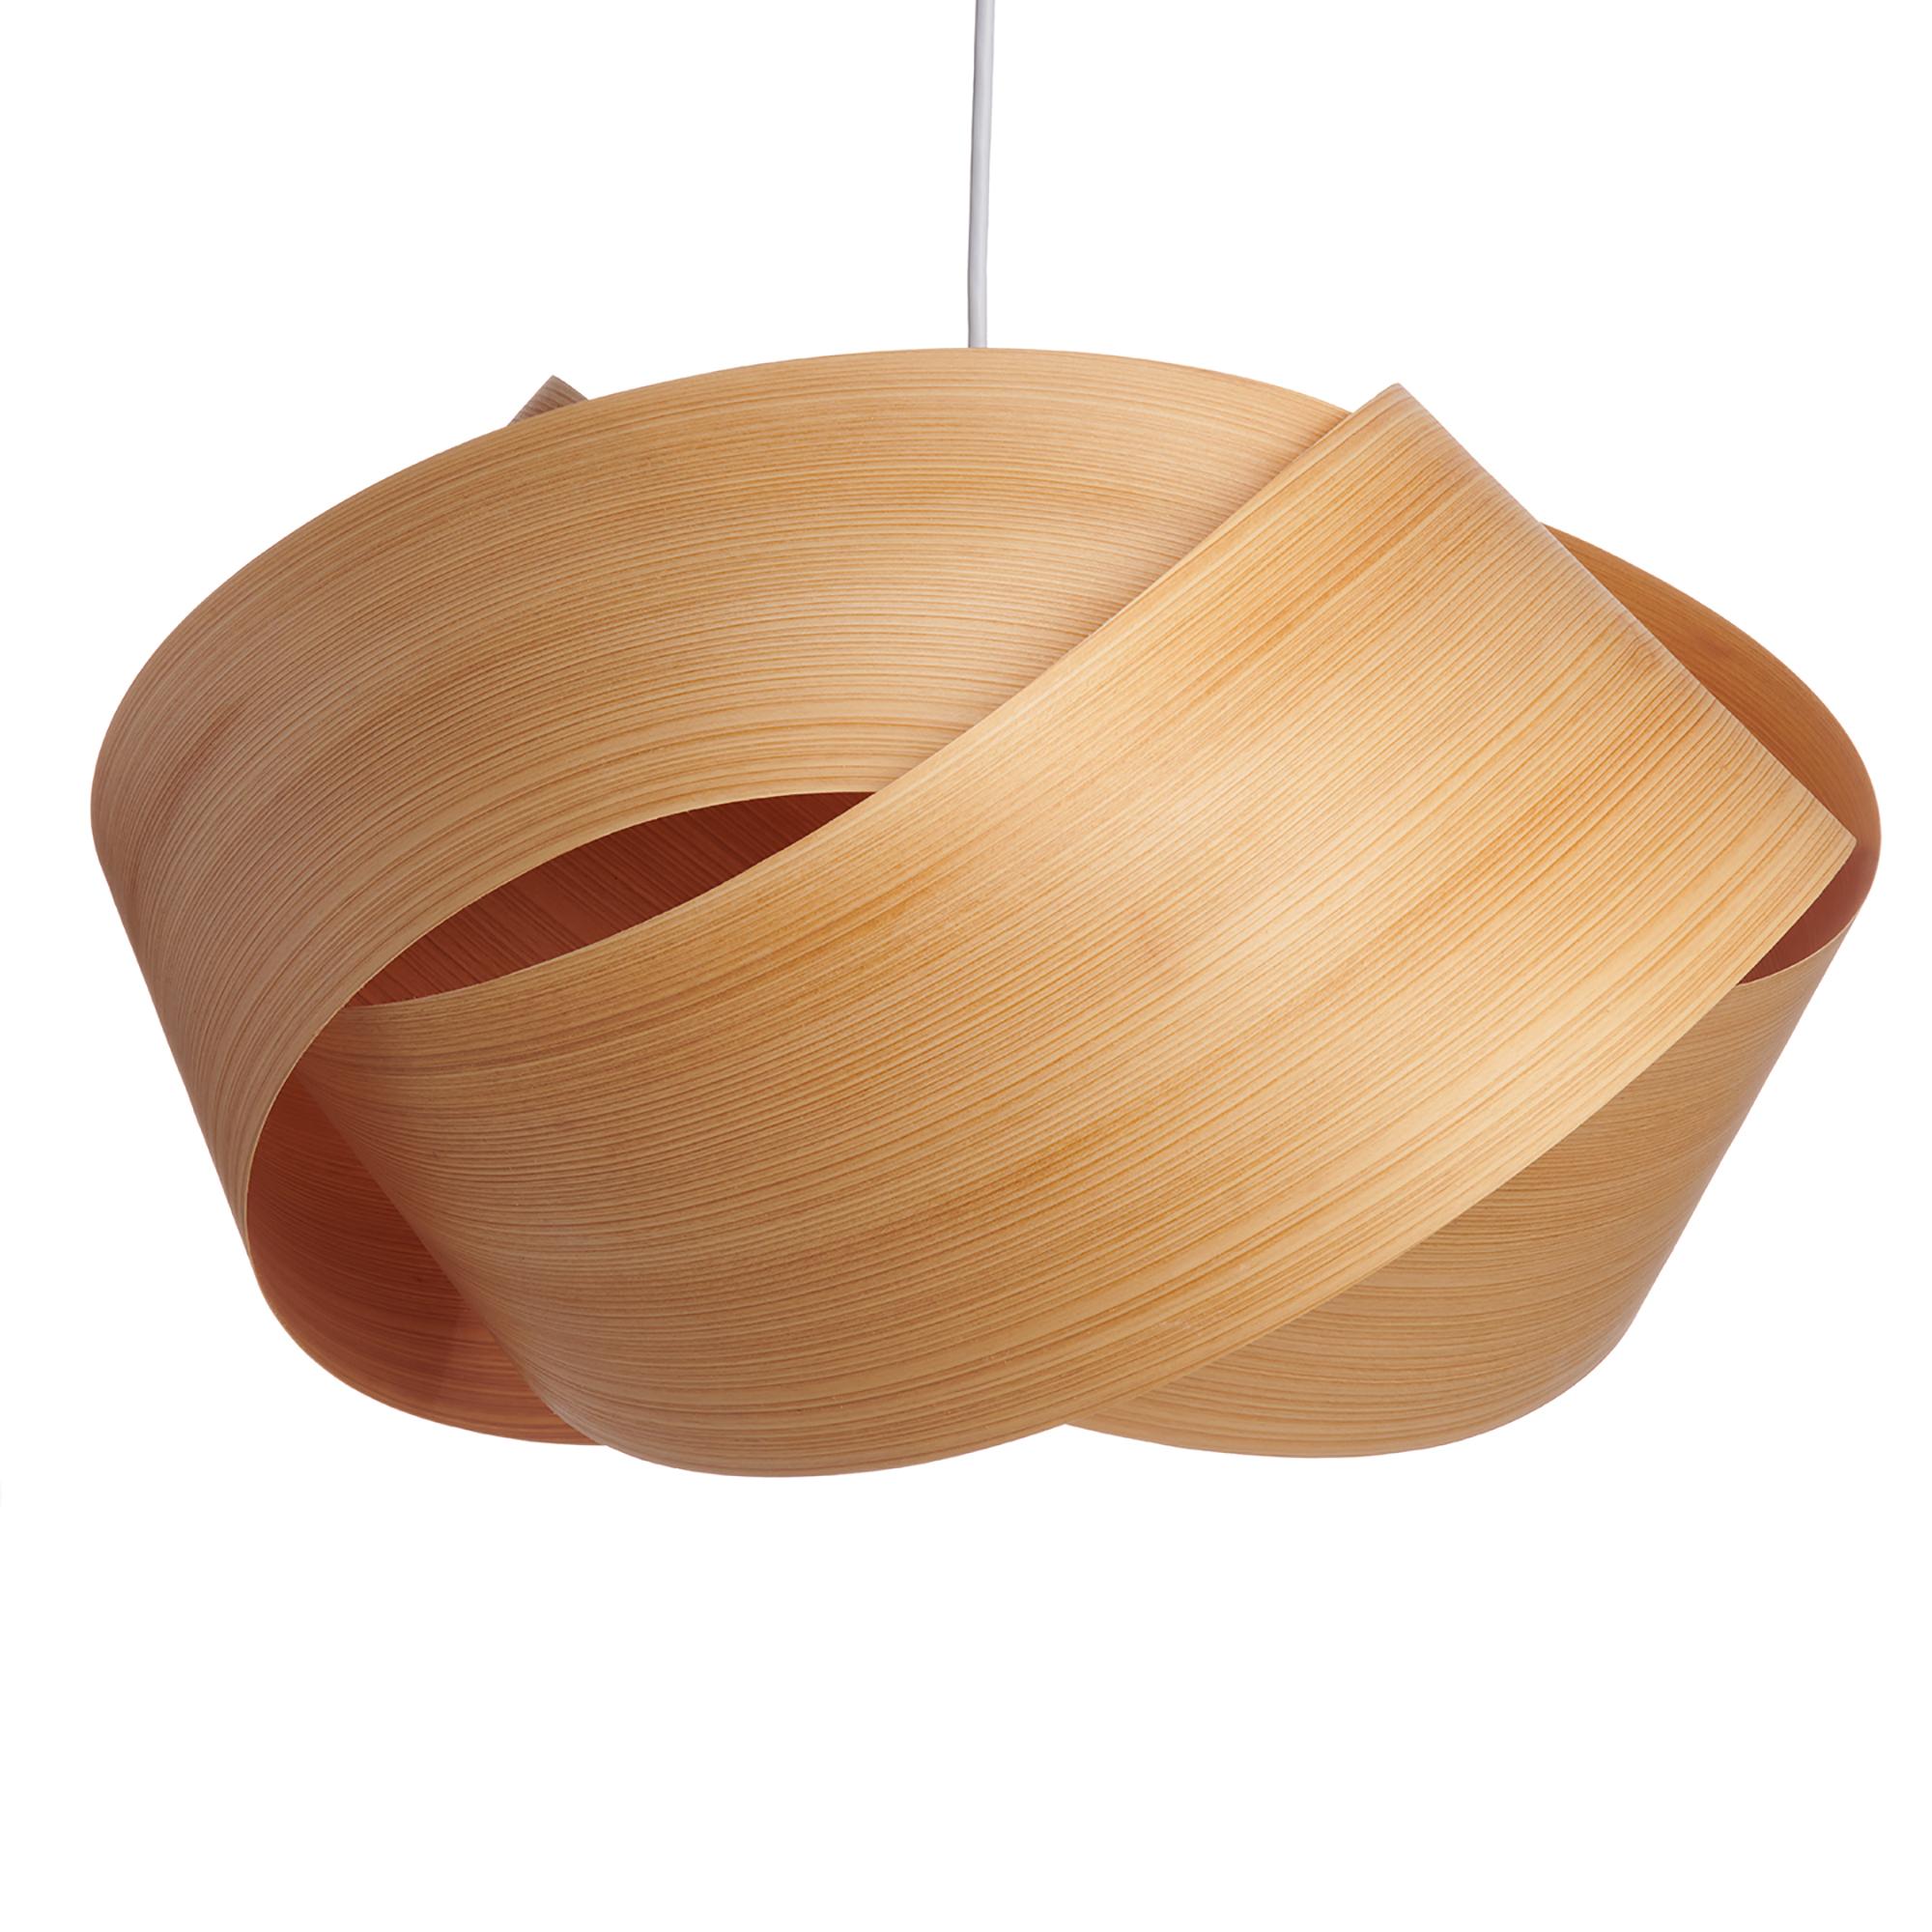 The Serene pendant light is a contemporary, Mid-Century Modern light fixture with a Scandinavian design and organic modern composition. This minimalist luxury wood veneer pendant design is the perfect way to add a touch of nature and elegance to